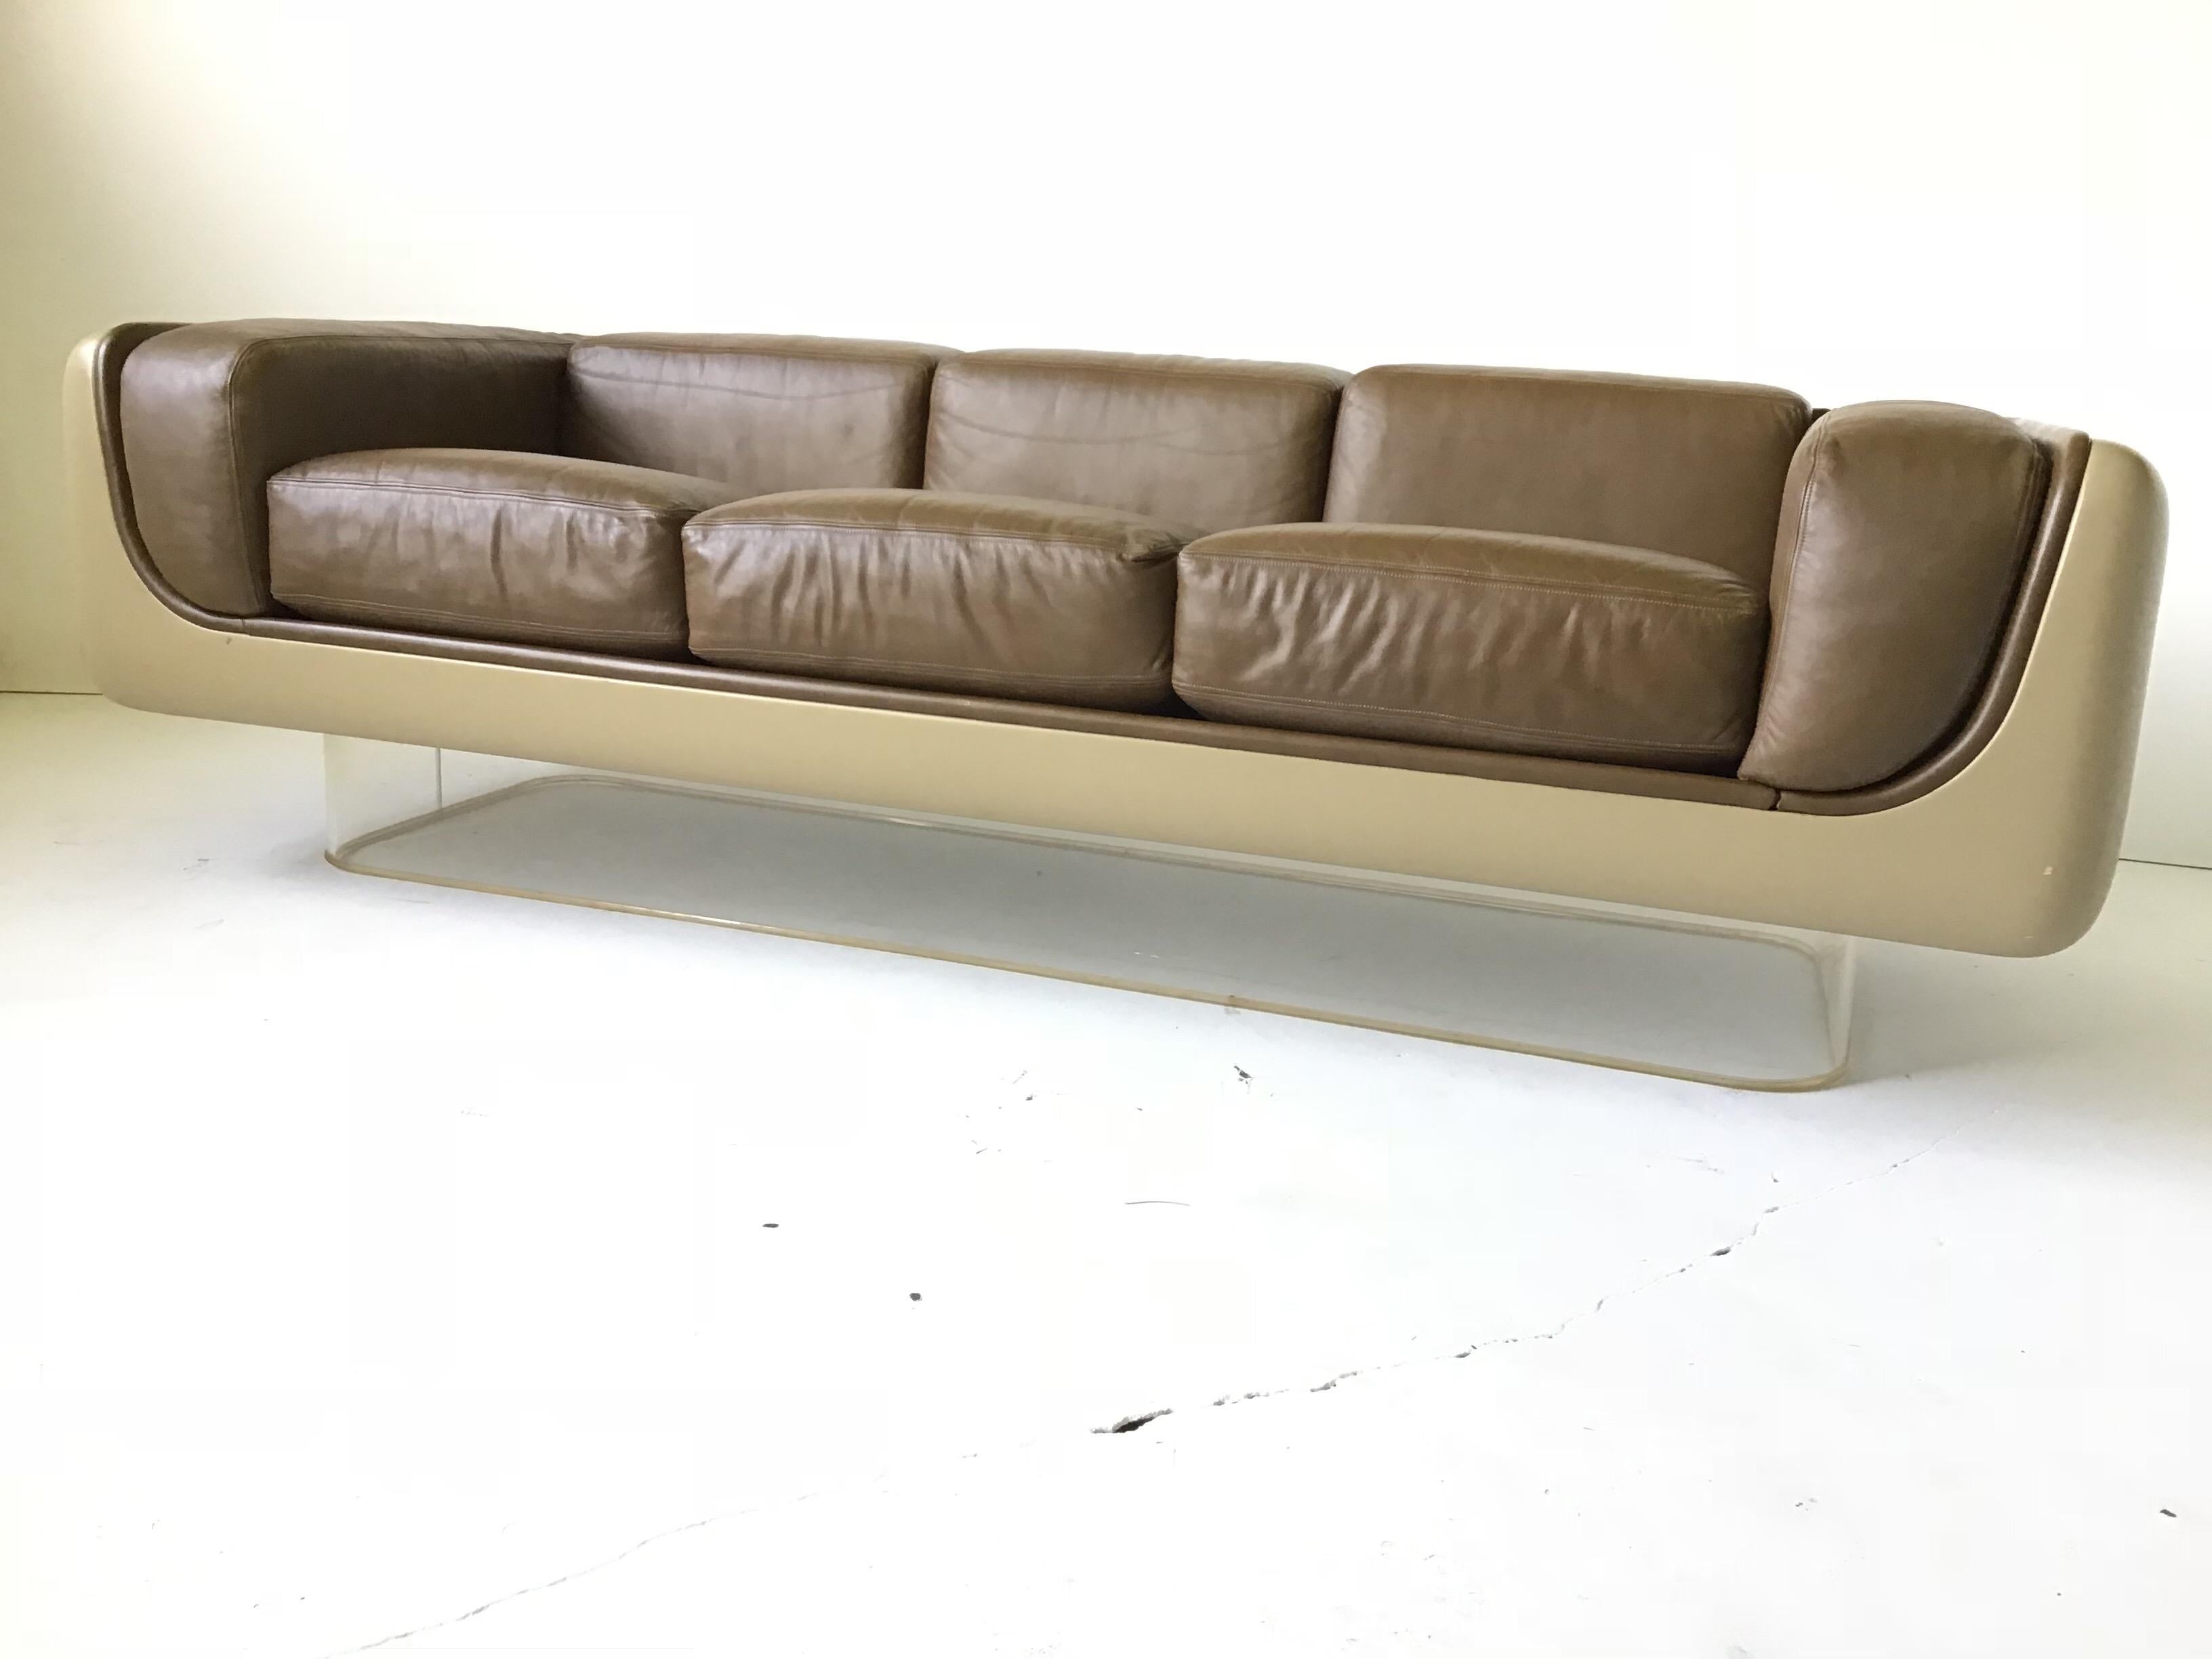 This is the most fantastic version of this sofa I have ever in original condition. It is a design by William Andrus for Steelcase furniture. It retains its orig chocolate leather cushions. The fiberglass is beige and it is on a Lucite base. This